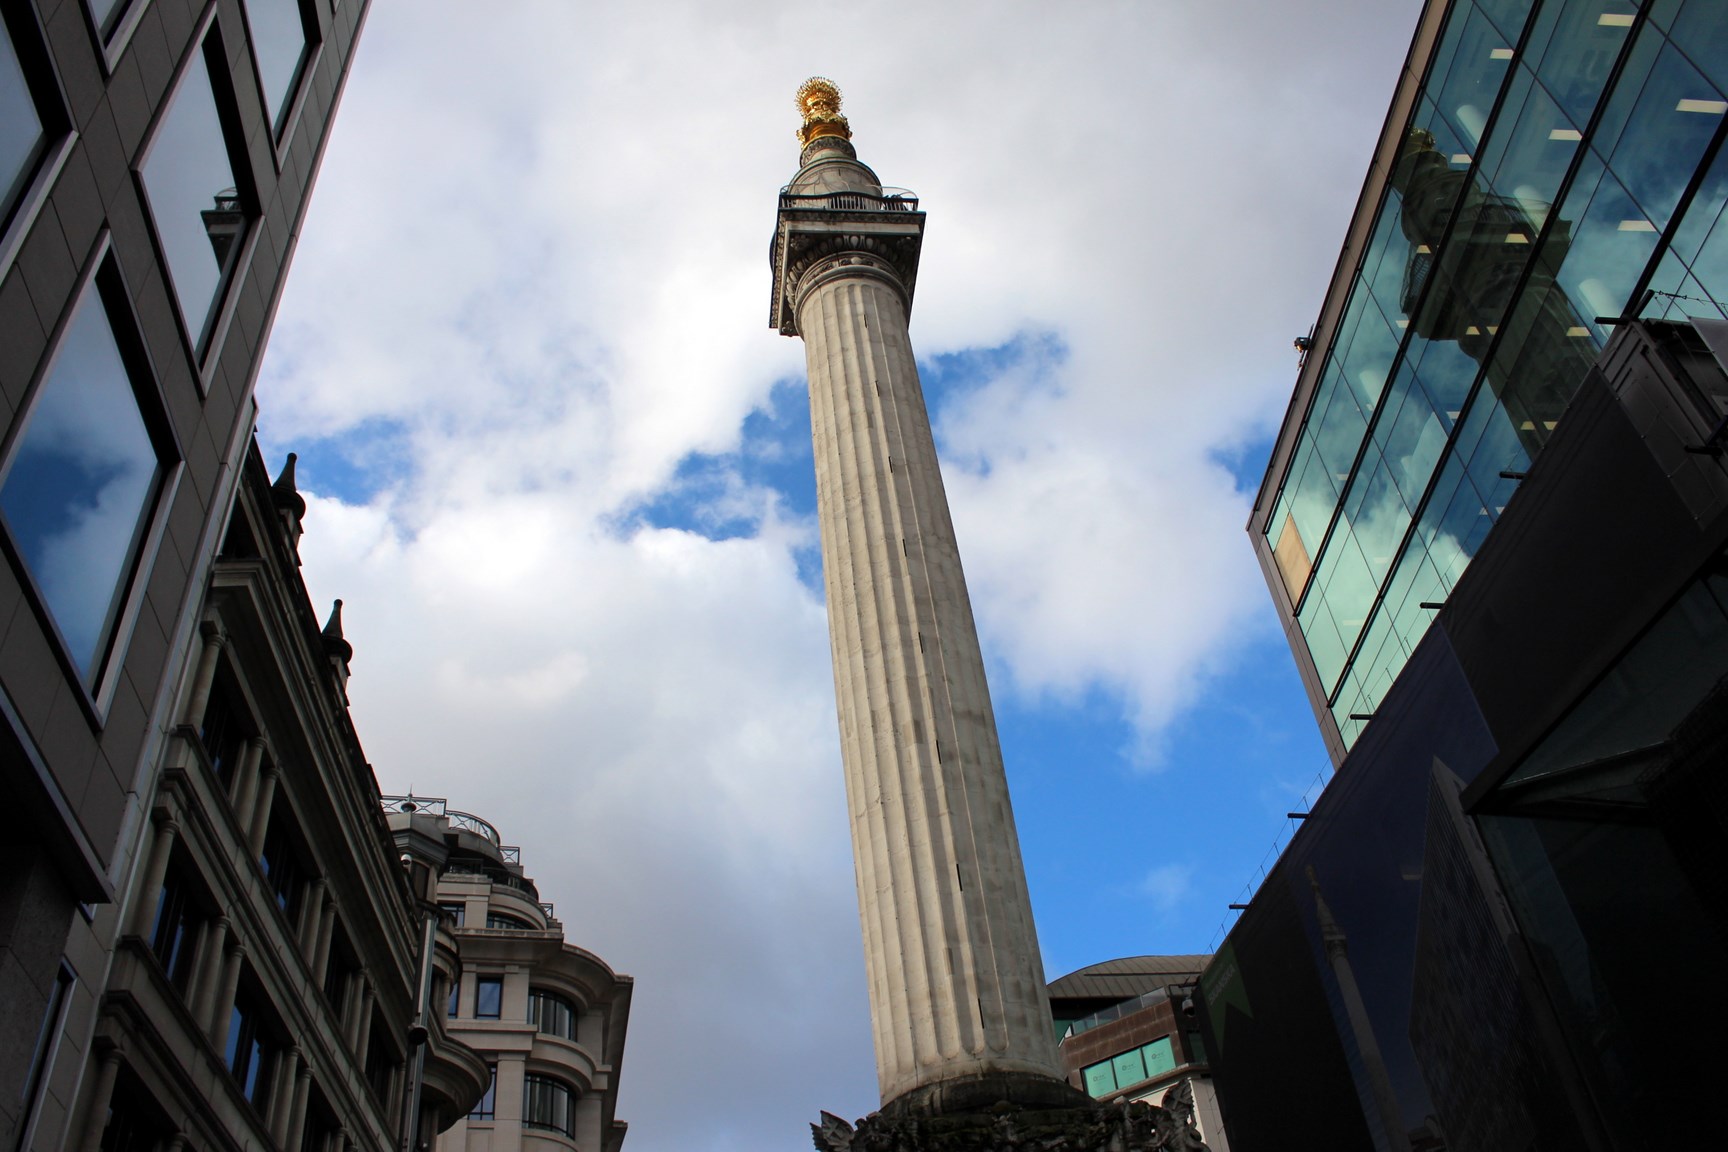 London’s best views – 5 reasons to visit Monument